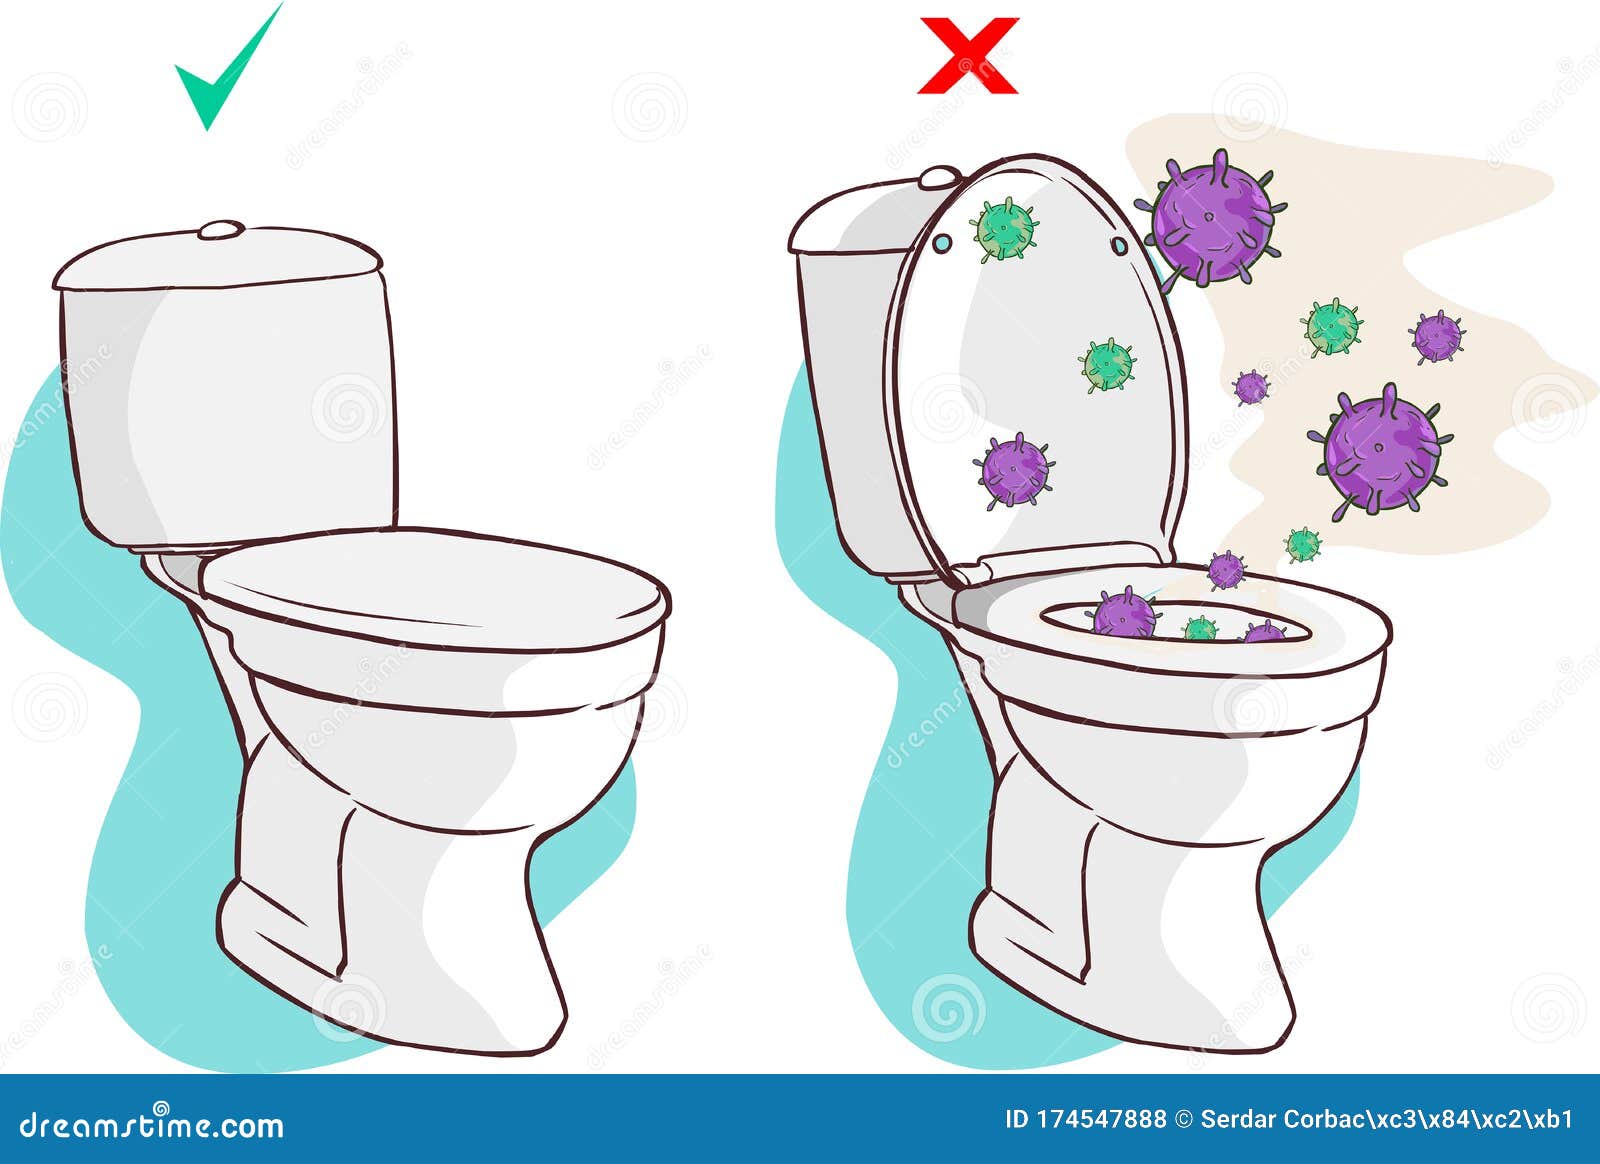 Open Toilet Lid Cause Dispersal Of Germ As A Result Of Flushing Cartoon